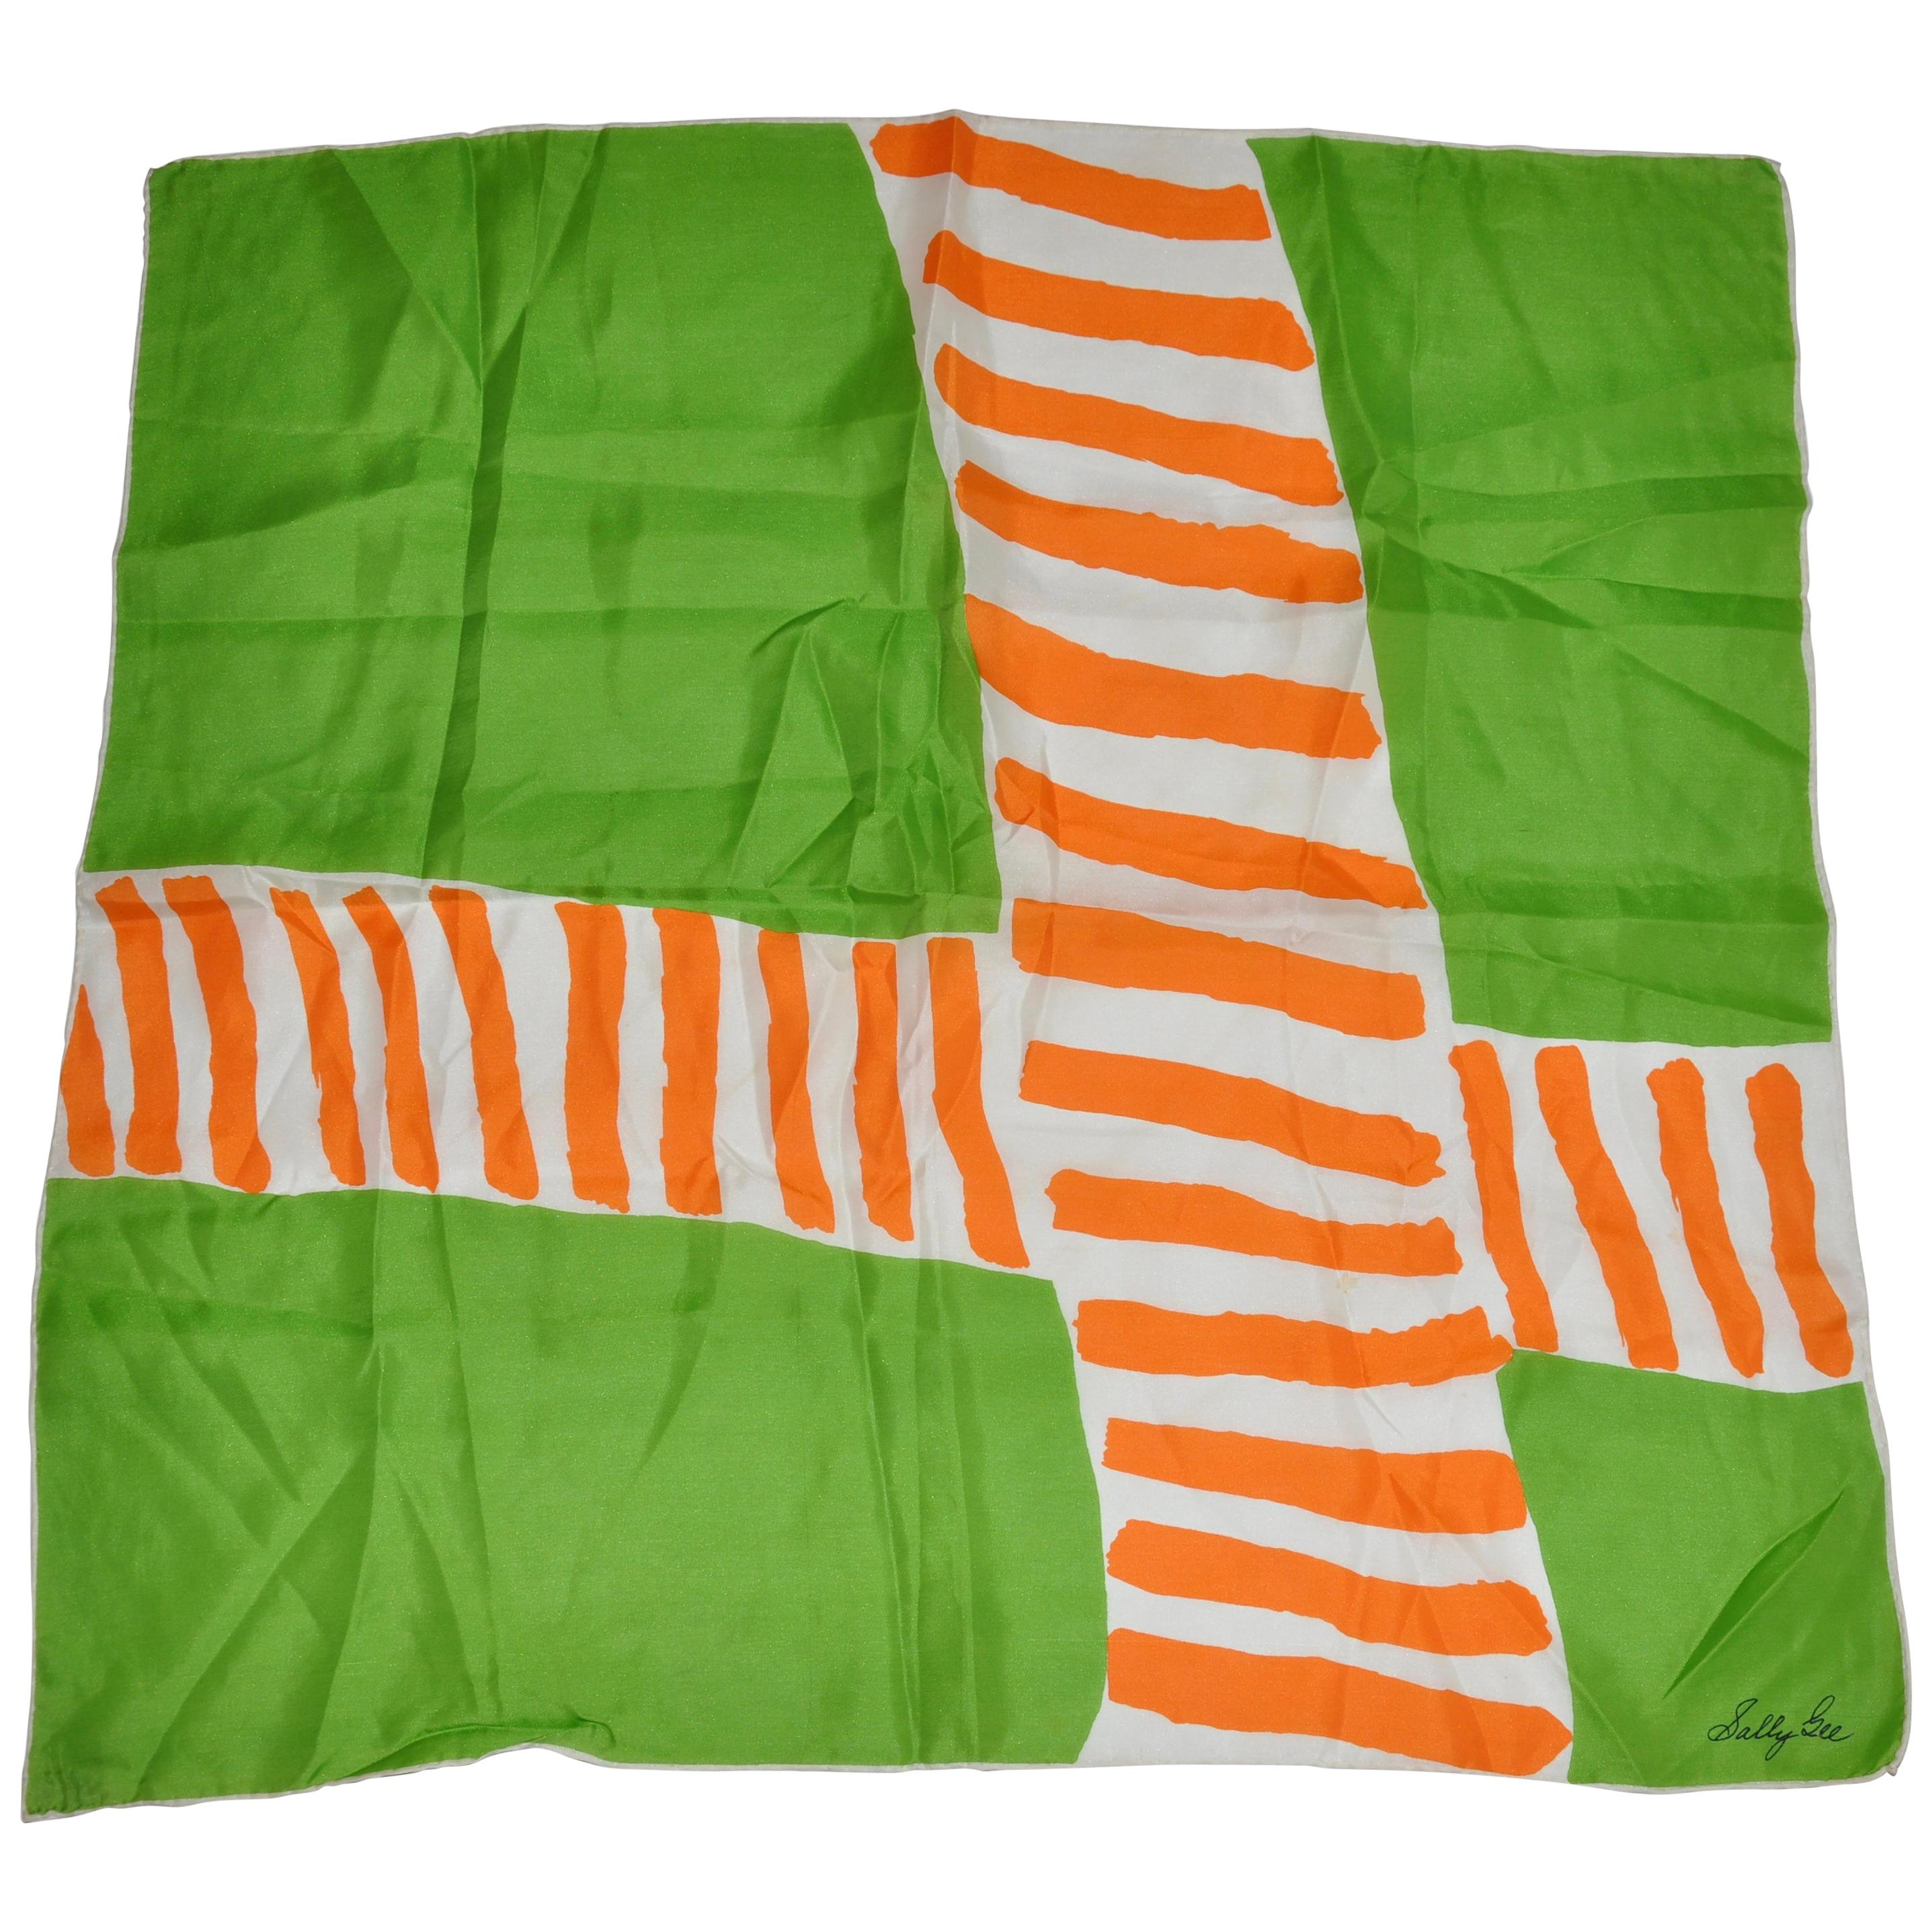 Sally Gee Neon Green & Tangerine "Candy Cane" Silk Scarf For Sale